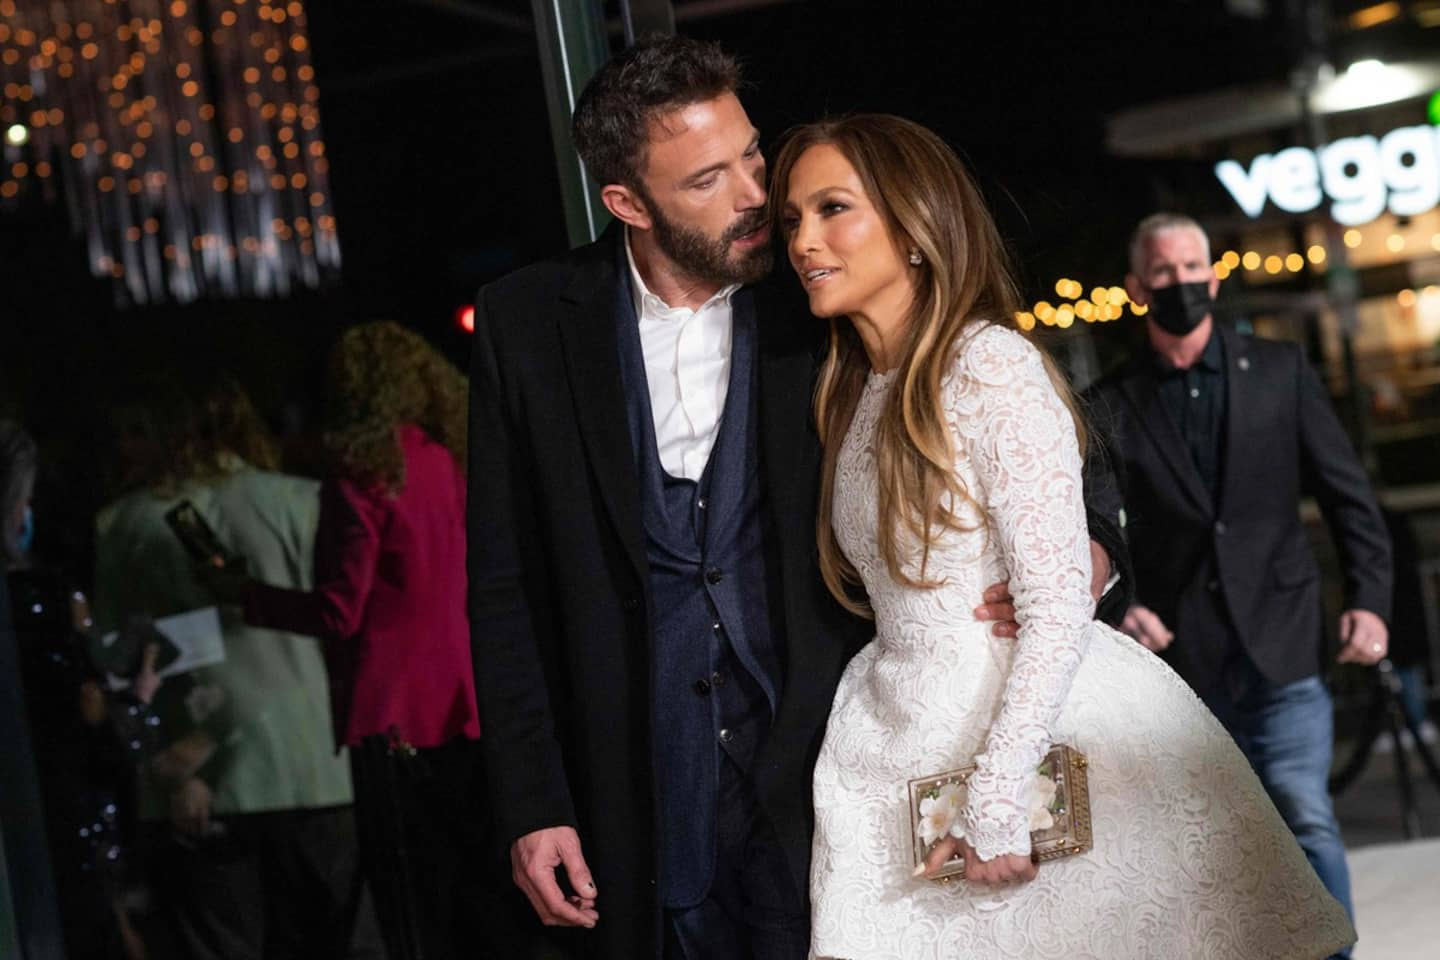 Stars Jennifer Lopez and Ben Affleck are married